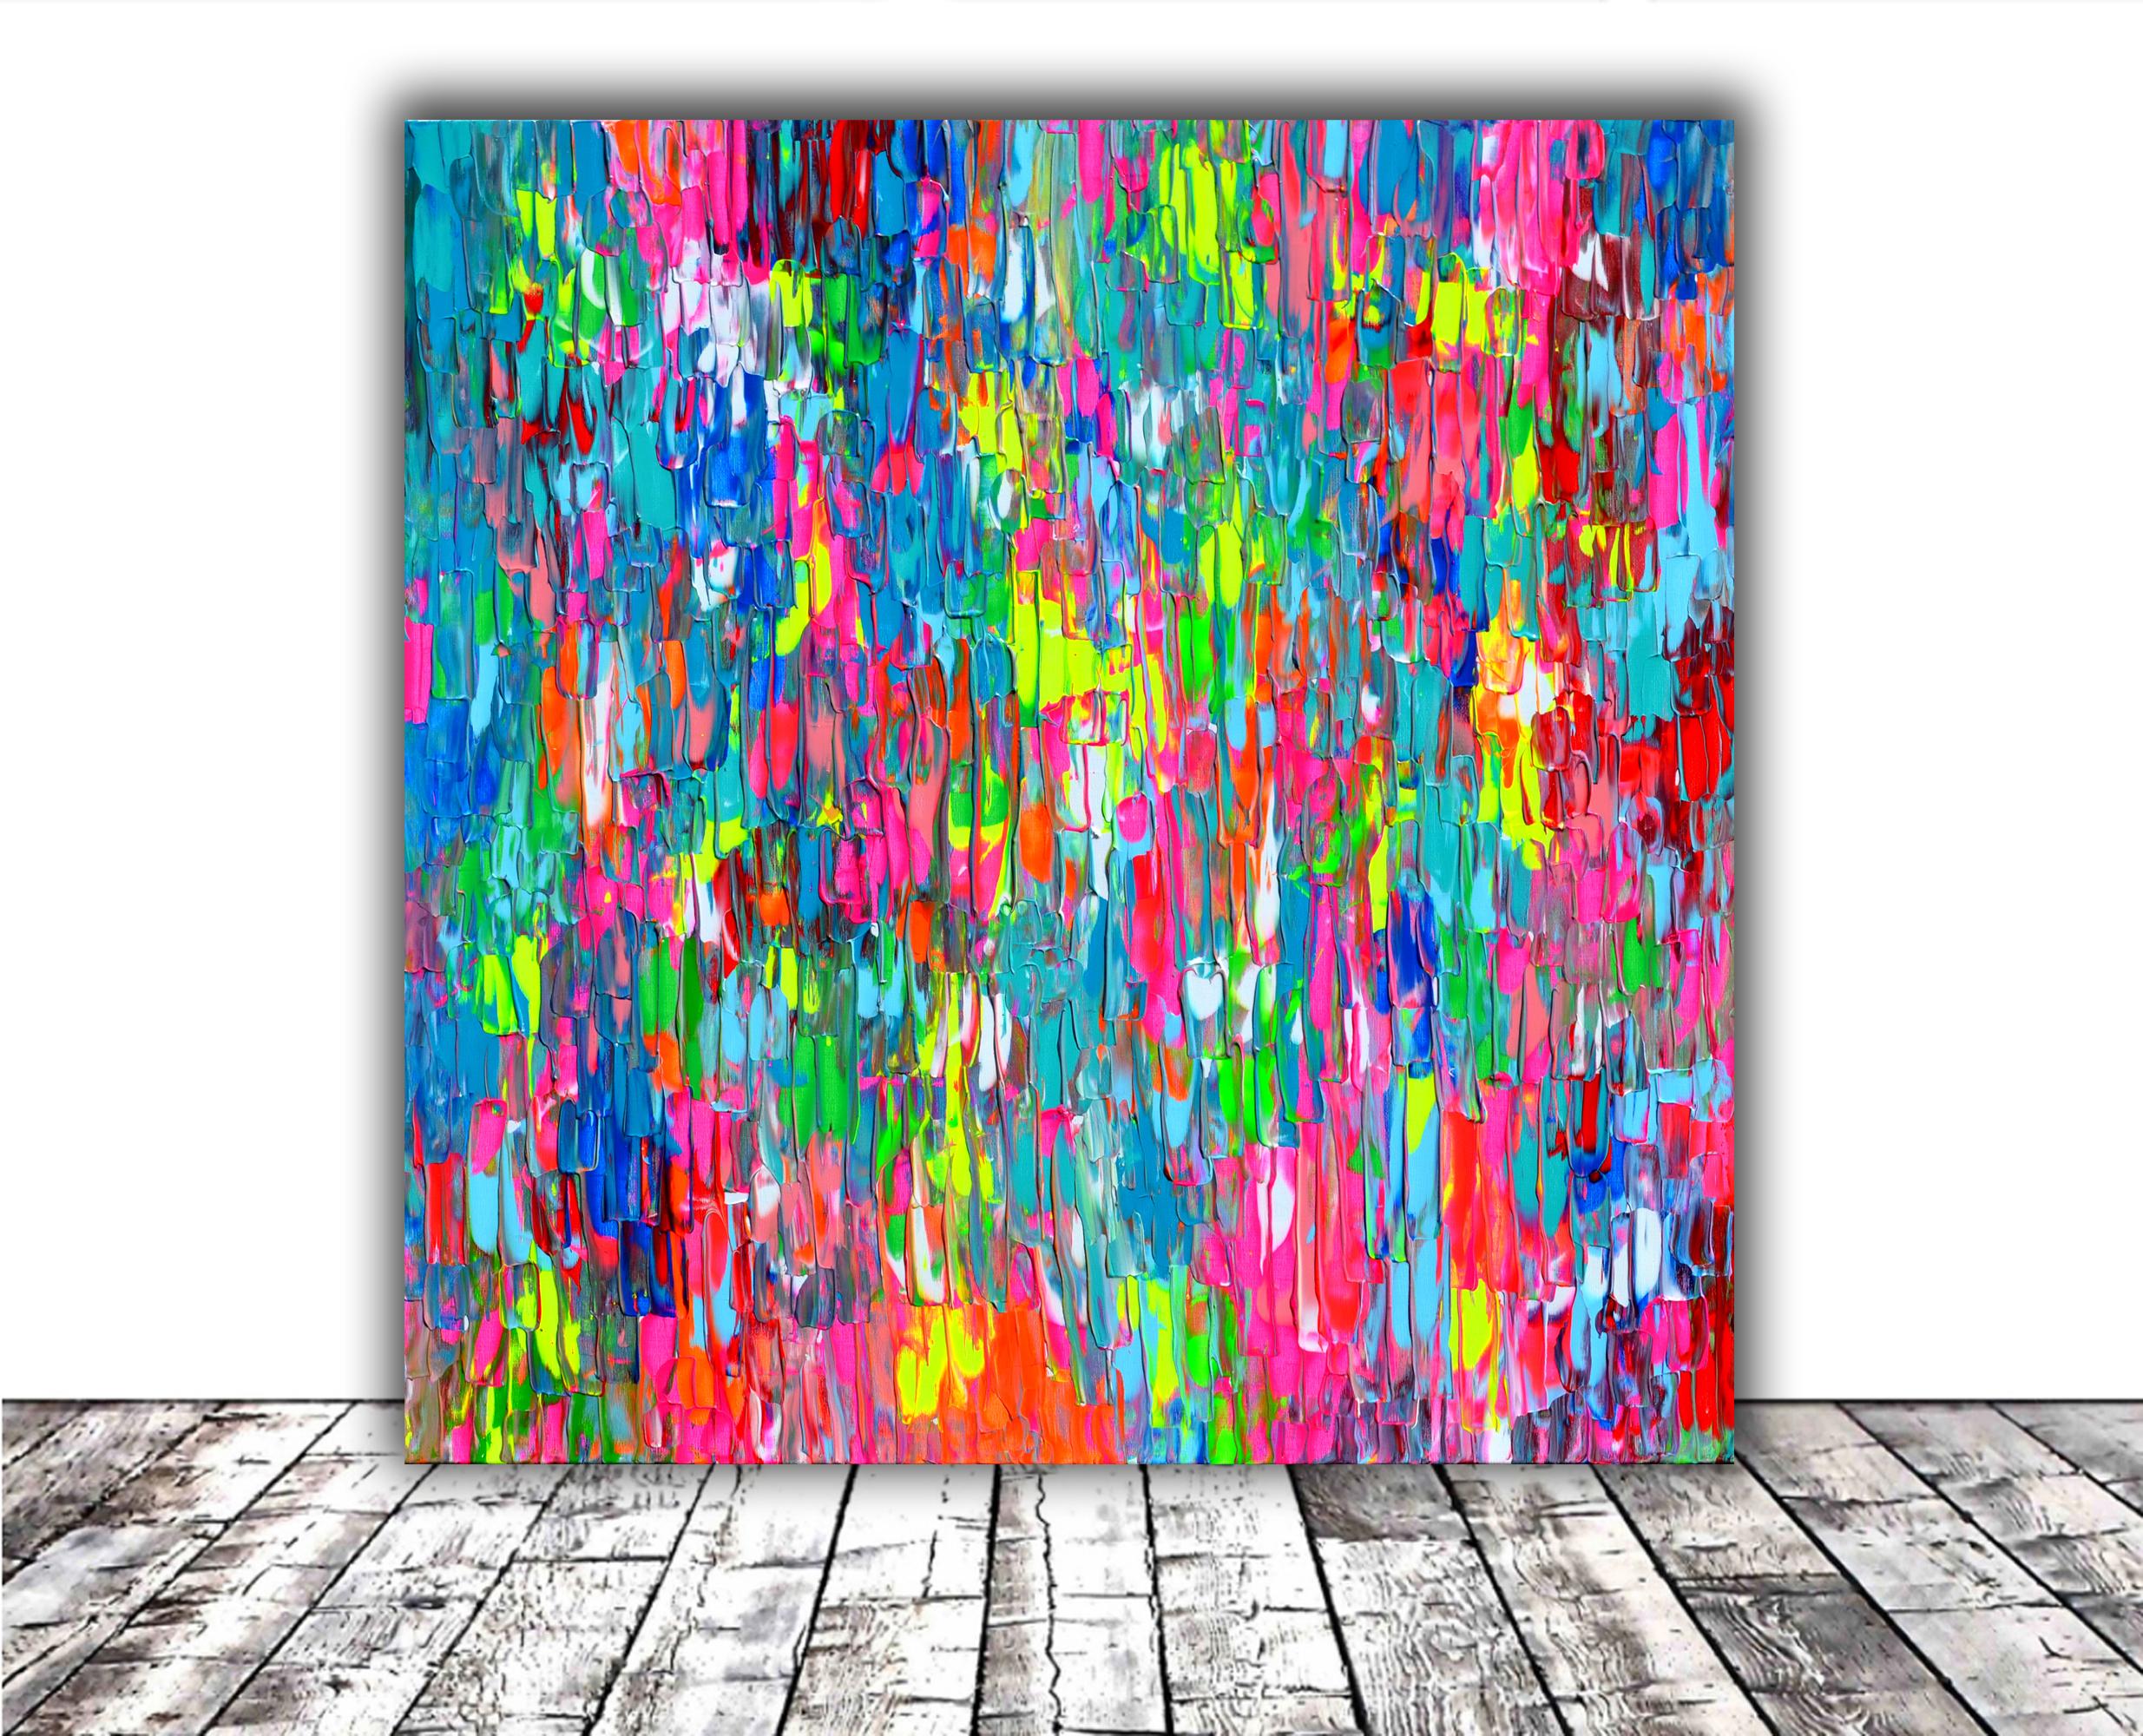 Spectrum 3 - Large Pallet Knife Textured Colorful Abstract Painting For Sale 1